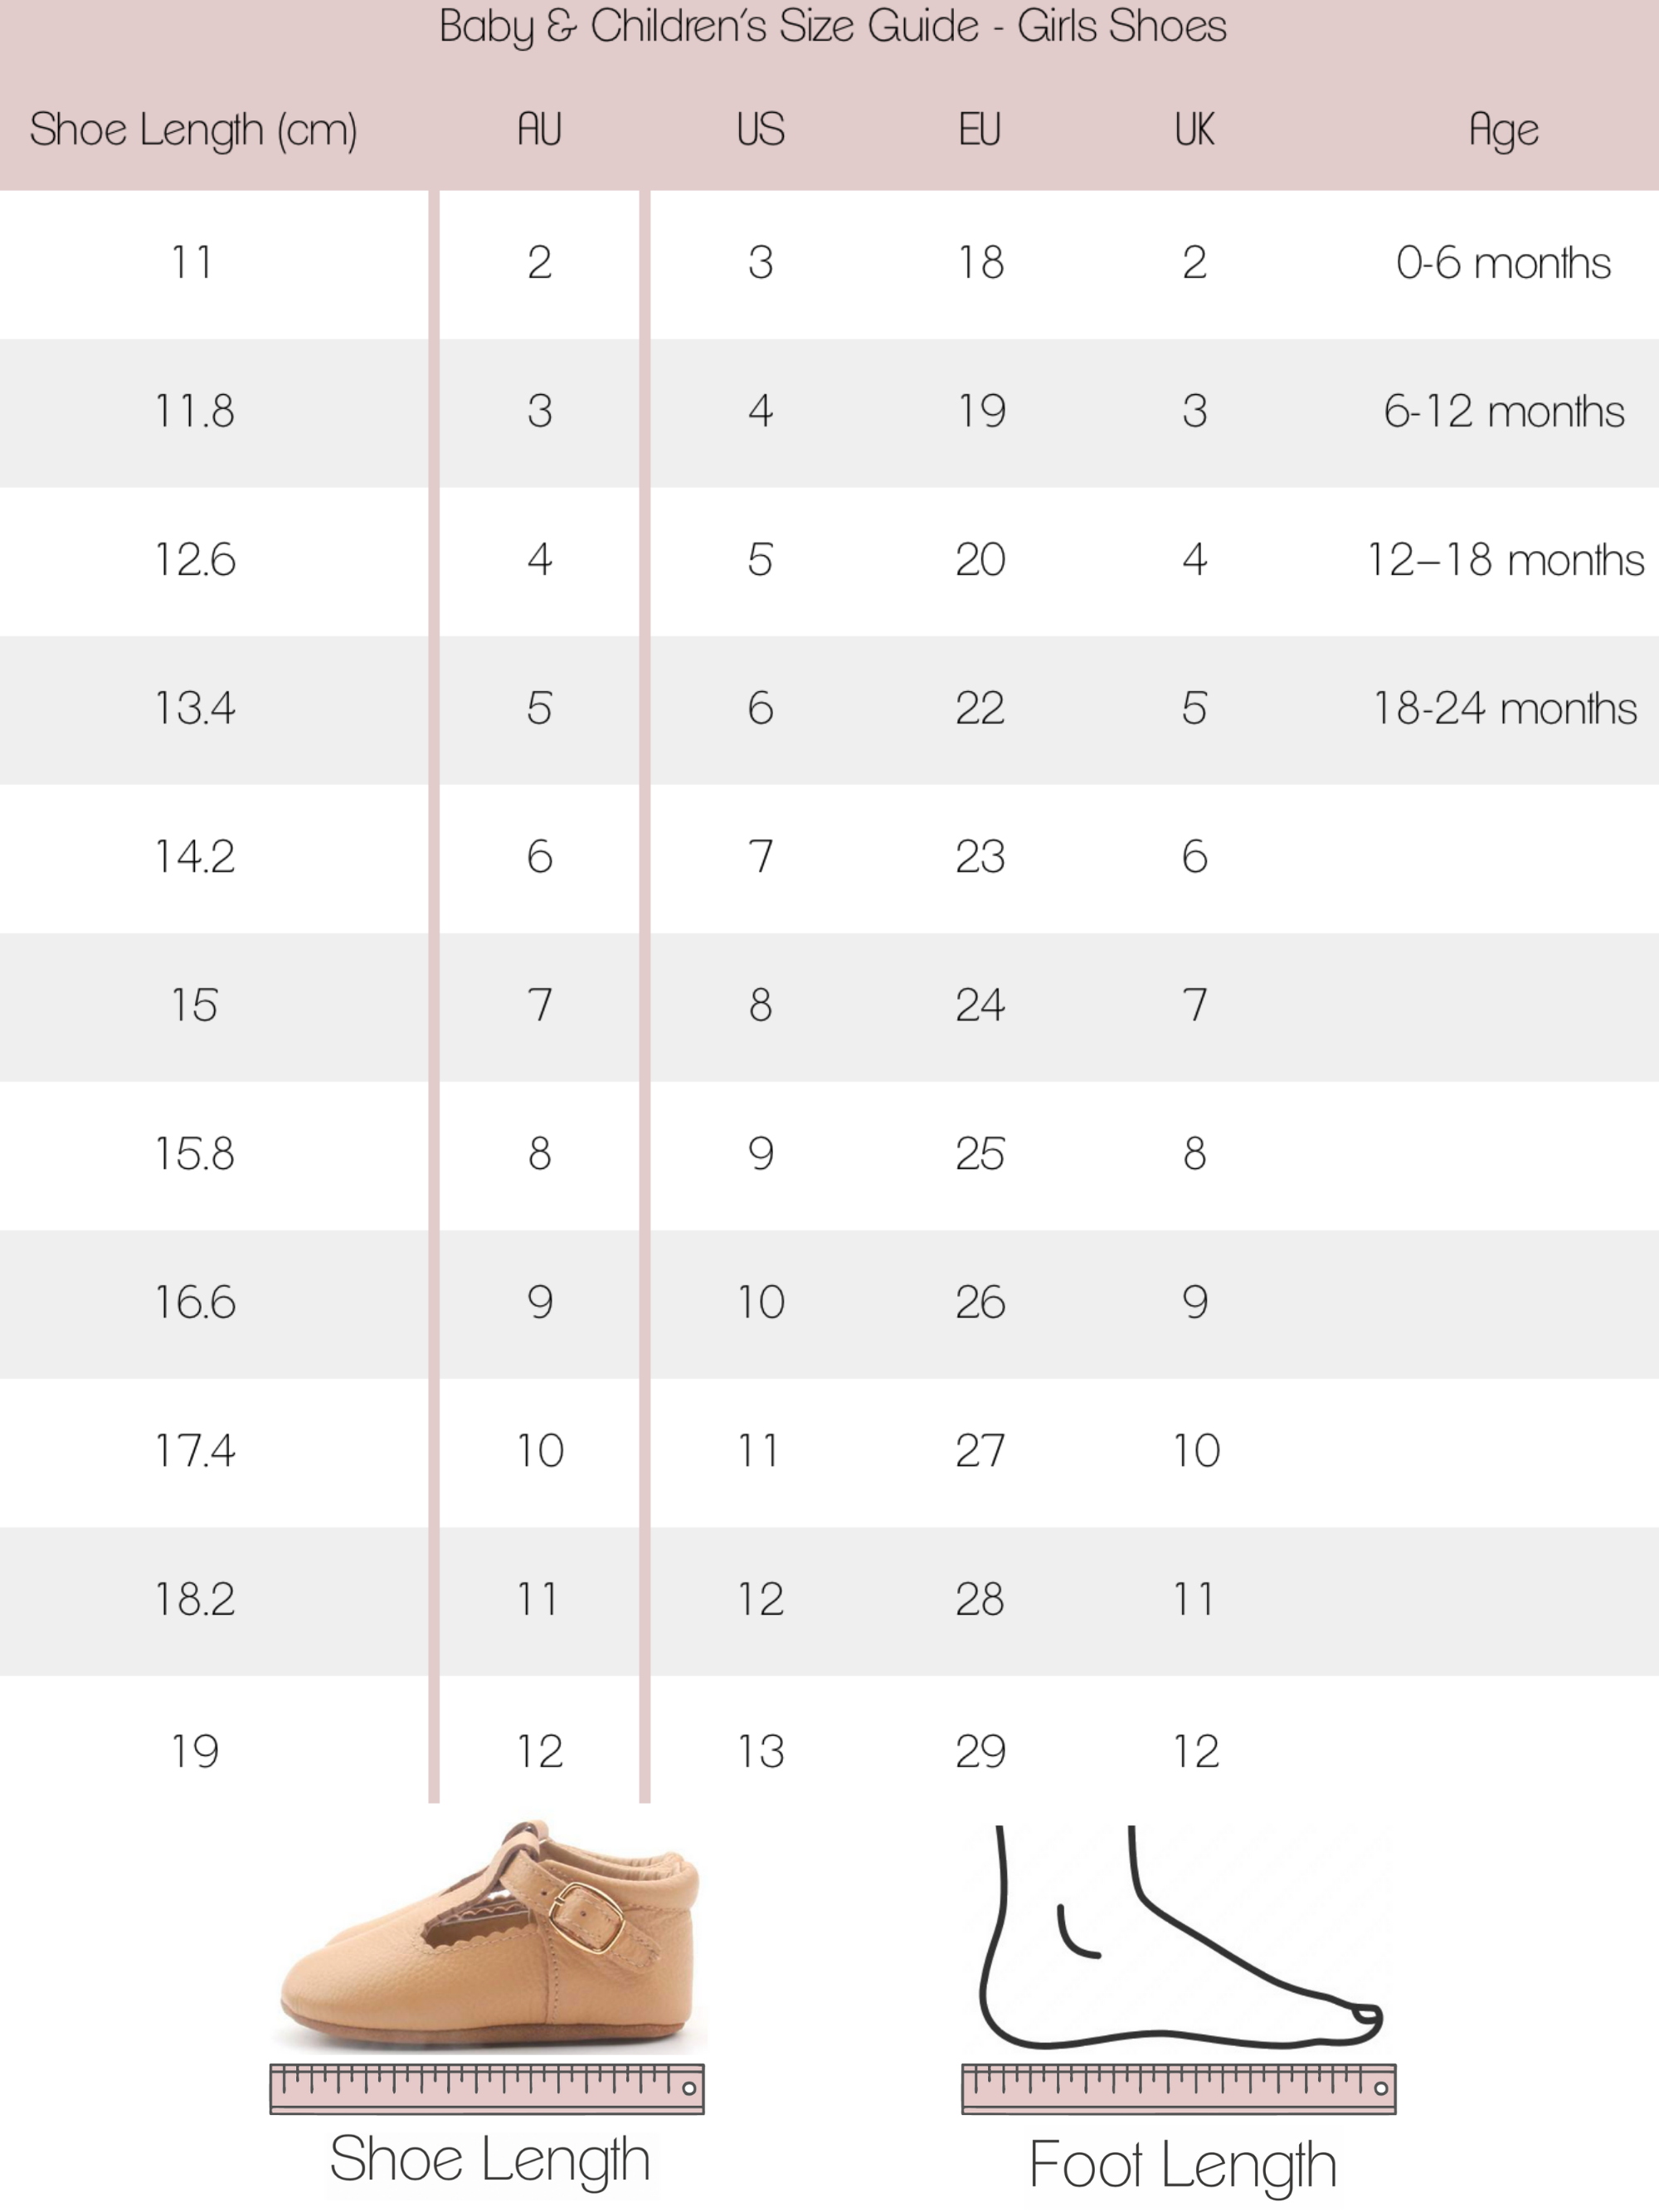 Baby Foot Size Chart